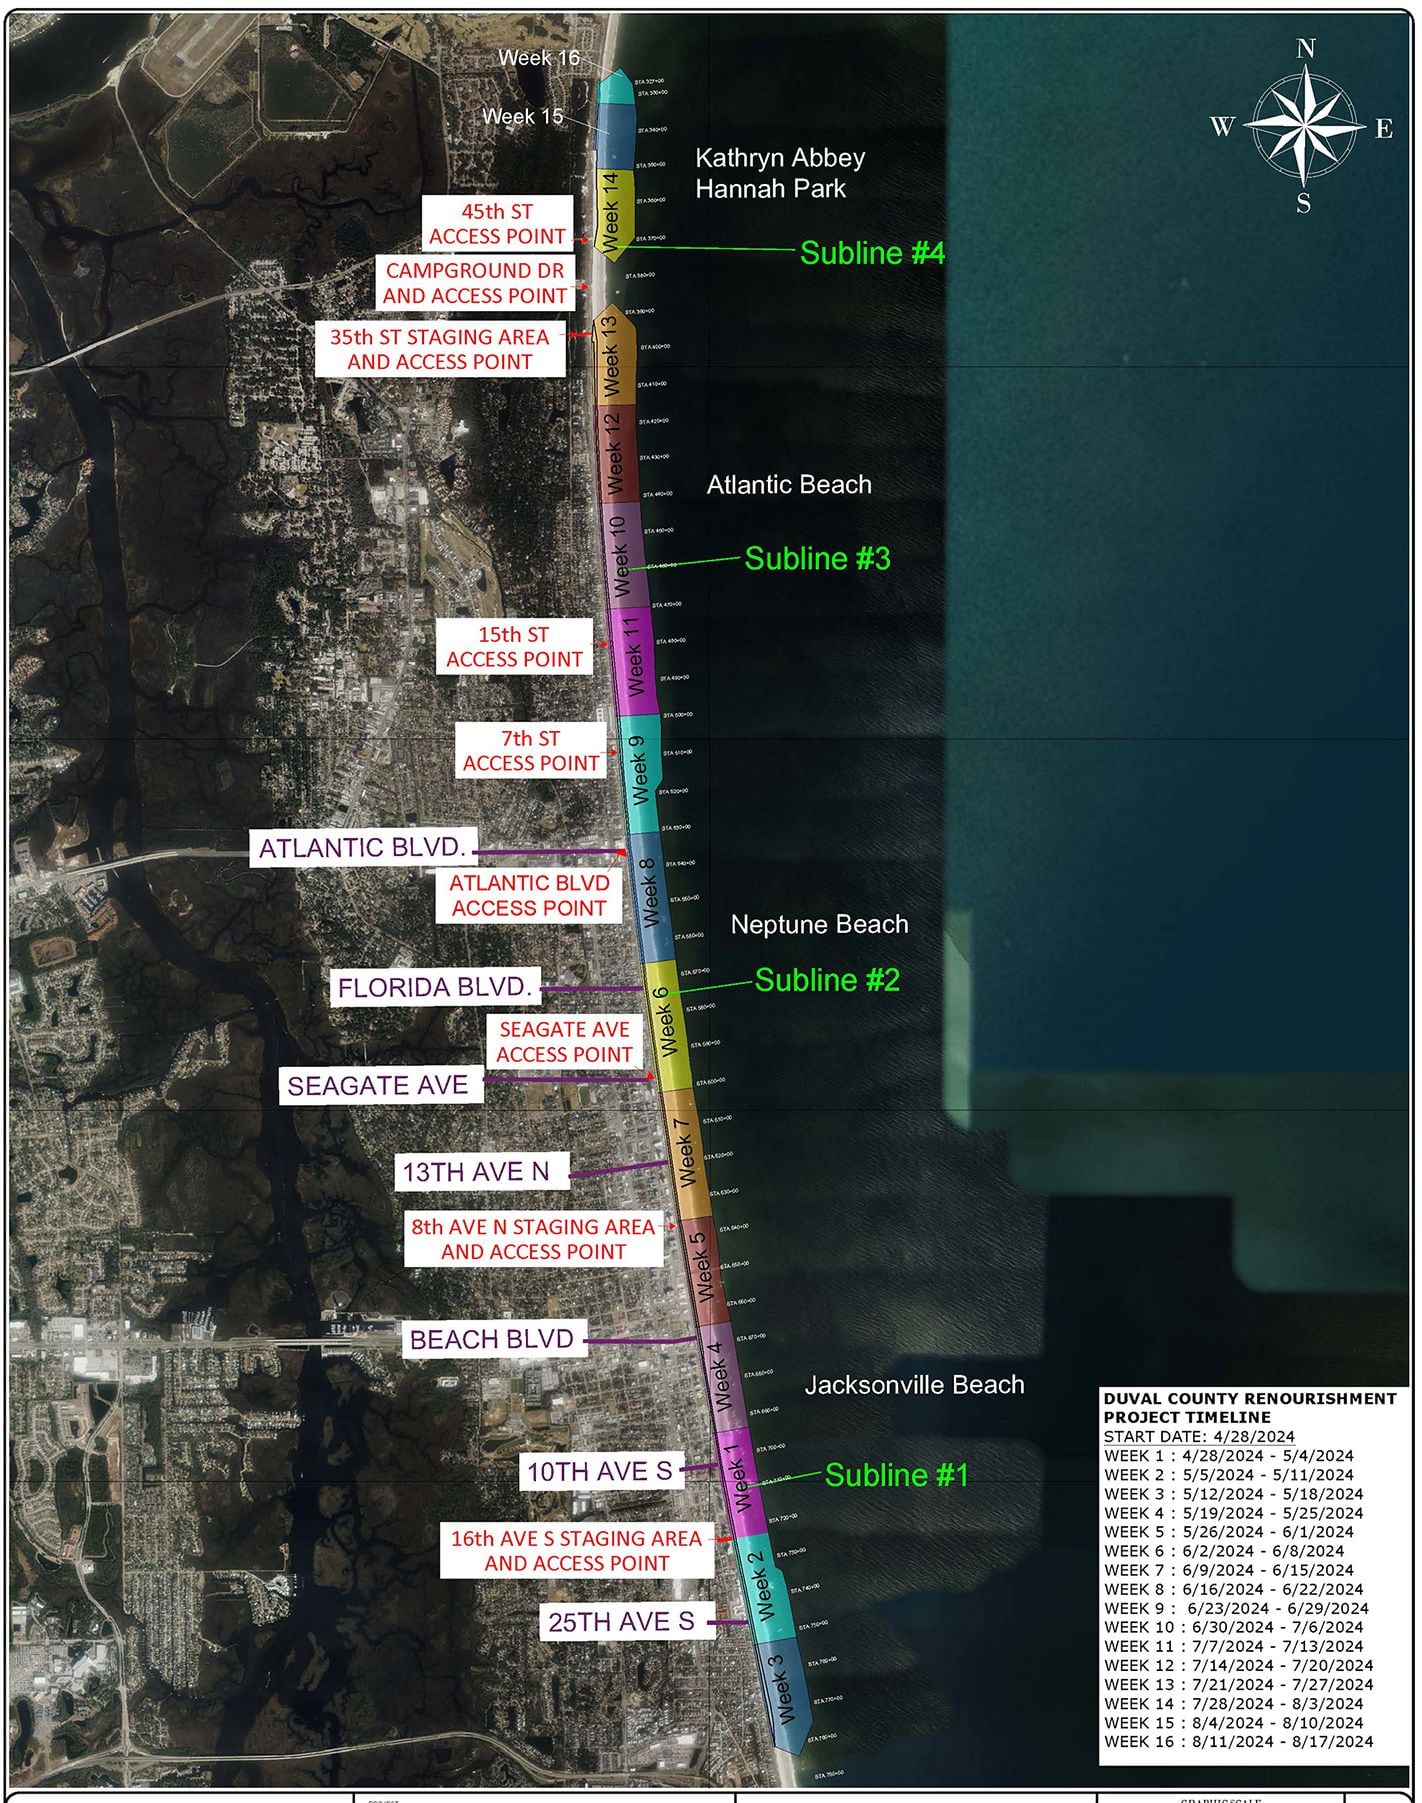 Plan for Duval County beaches renourishment project